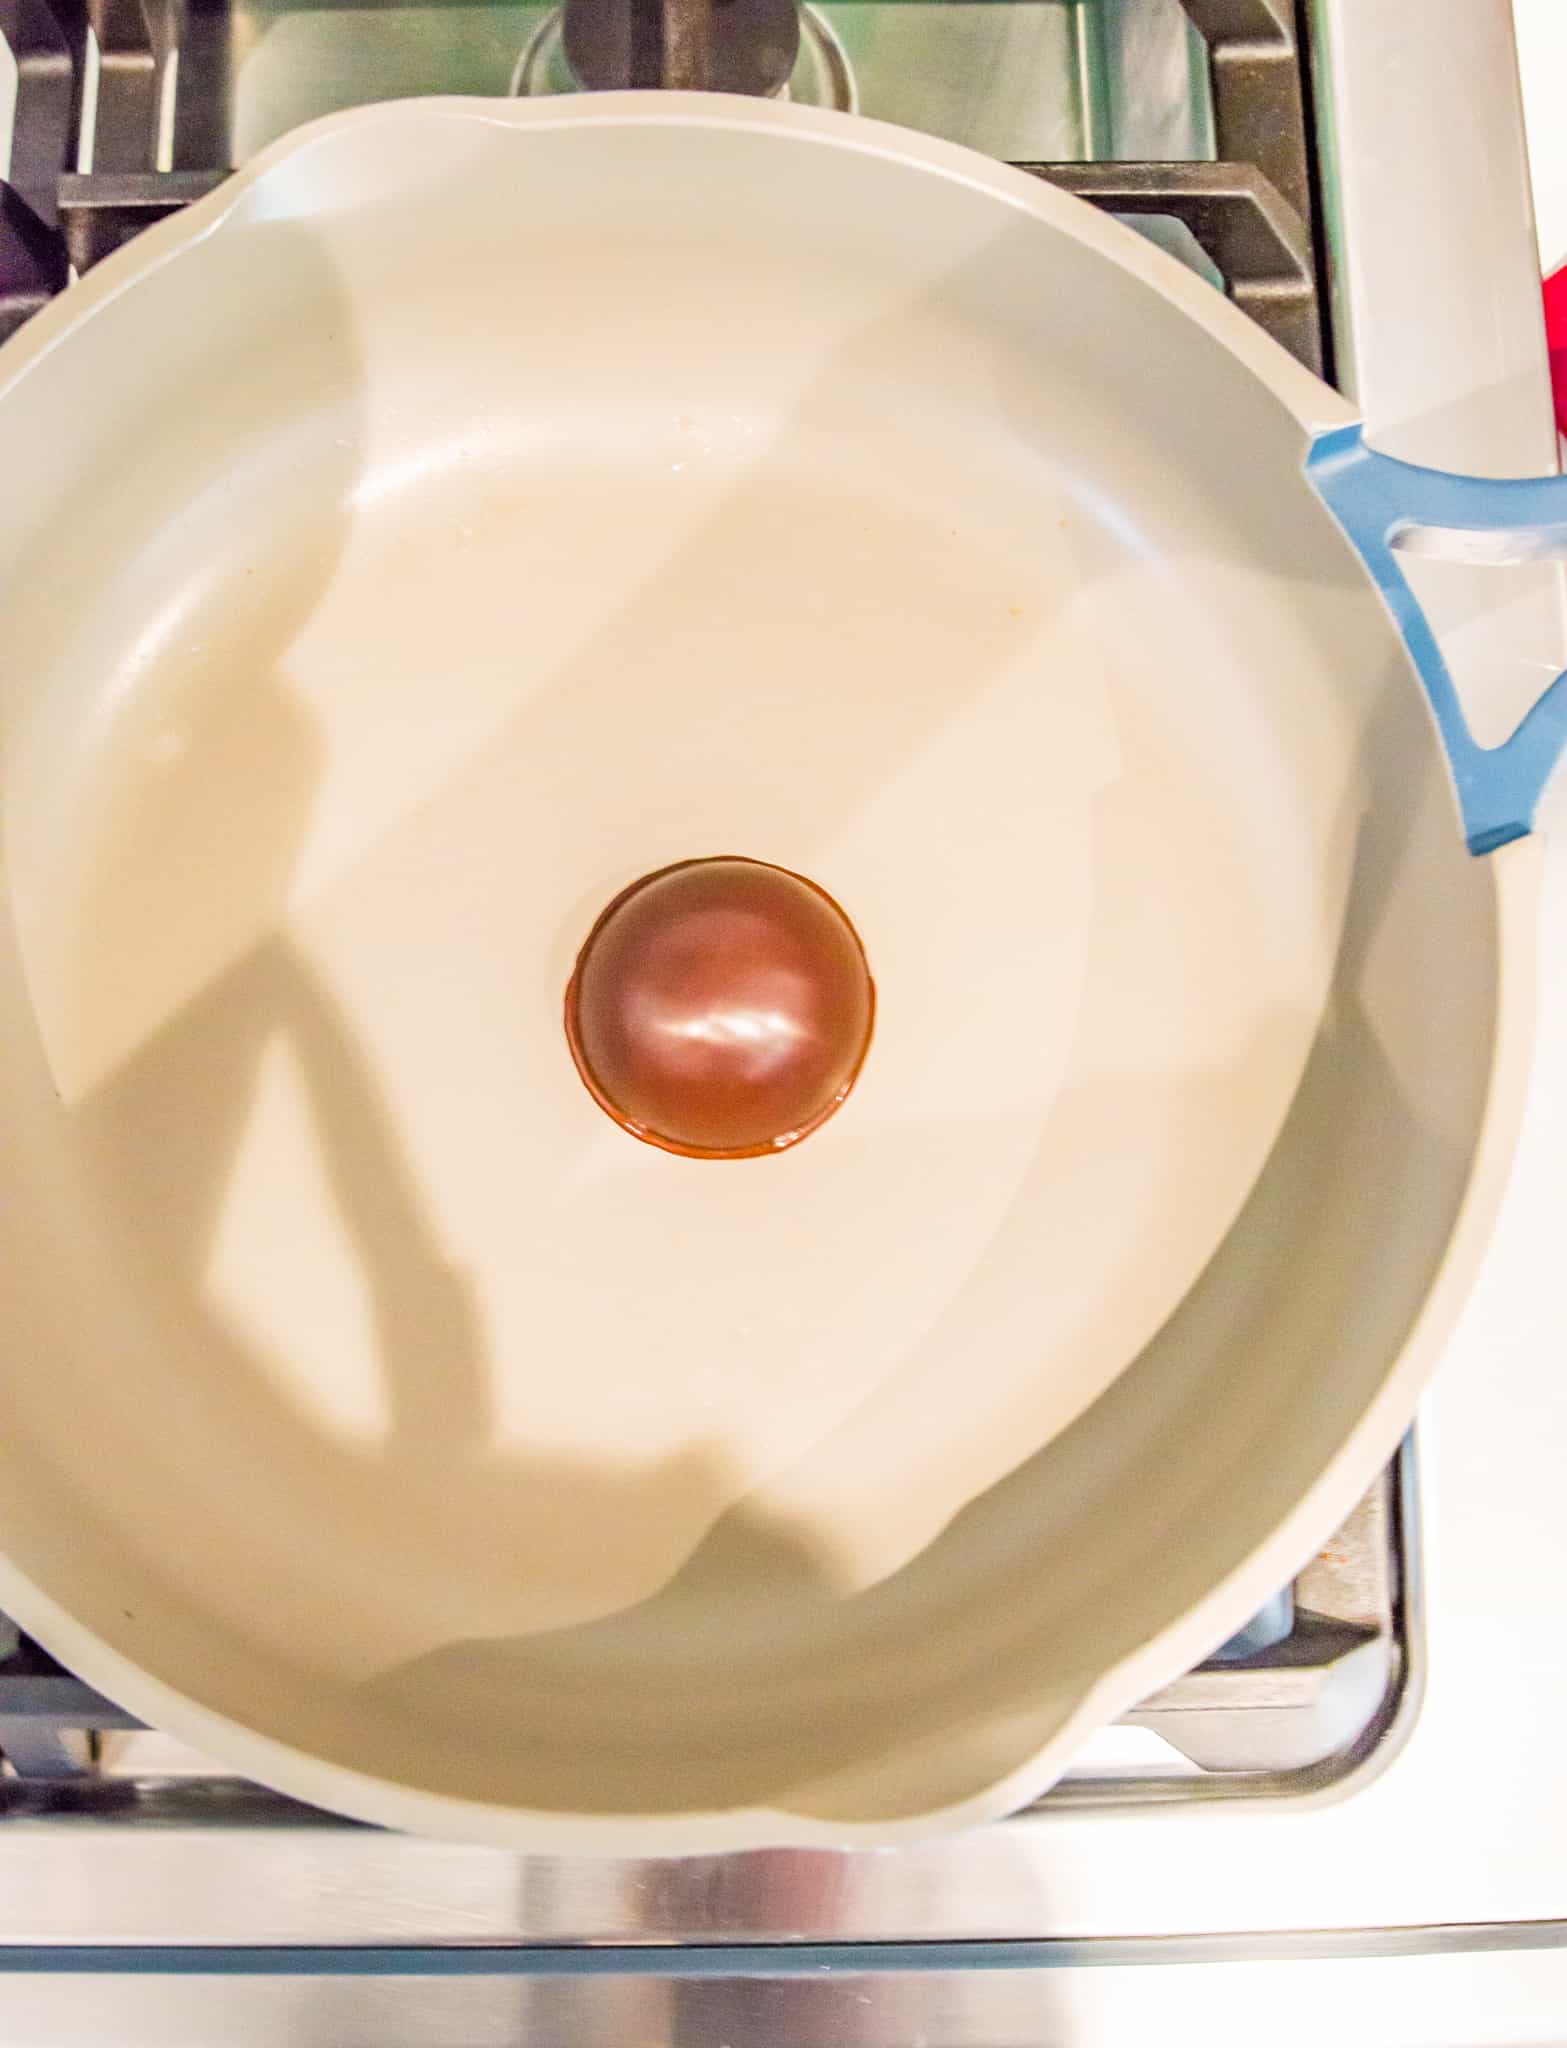 Half a chocolate sphere being heated in a frying pan on the stovetop.